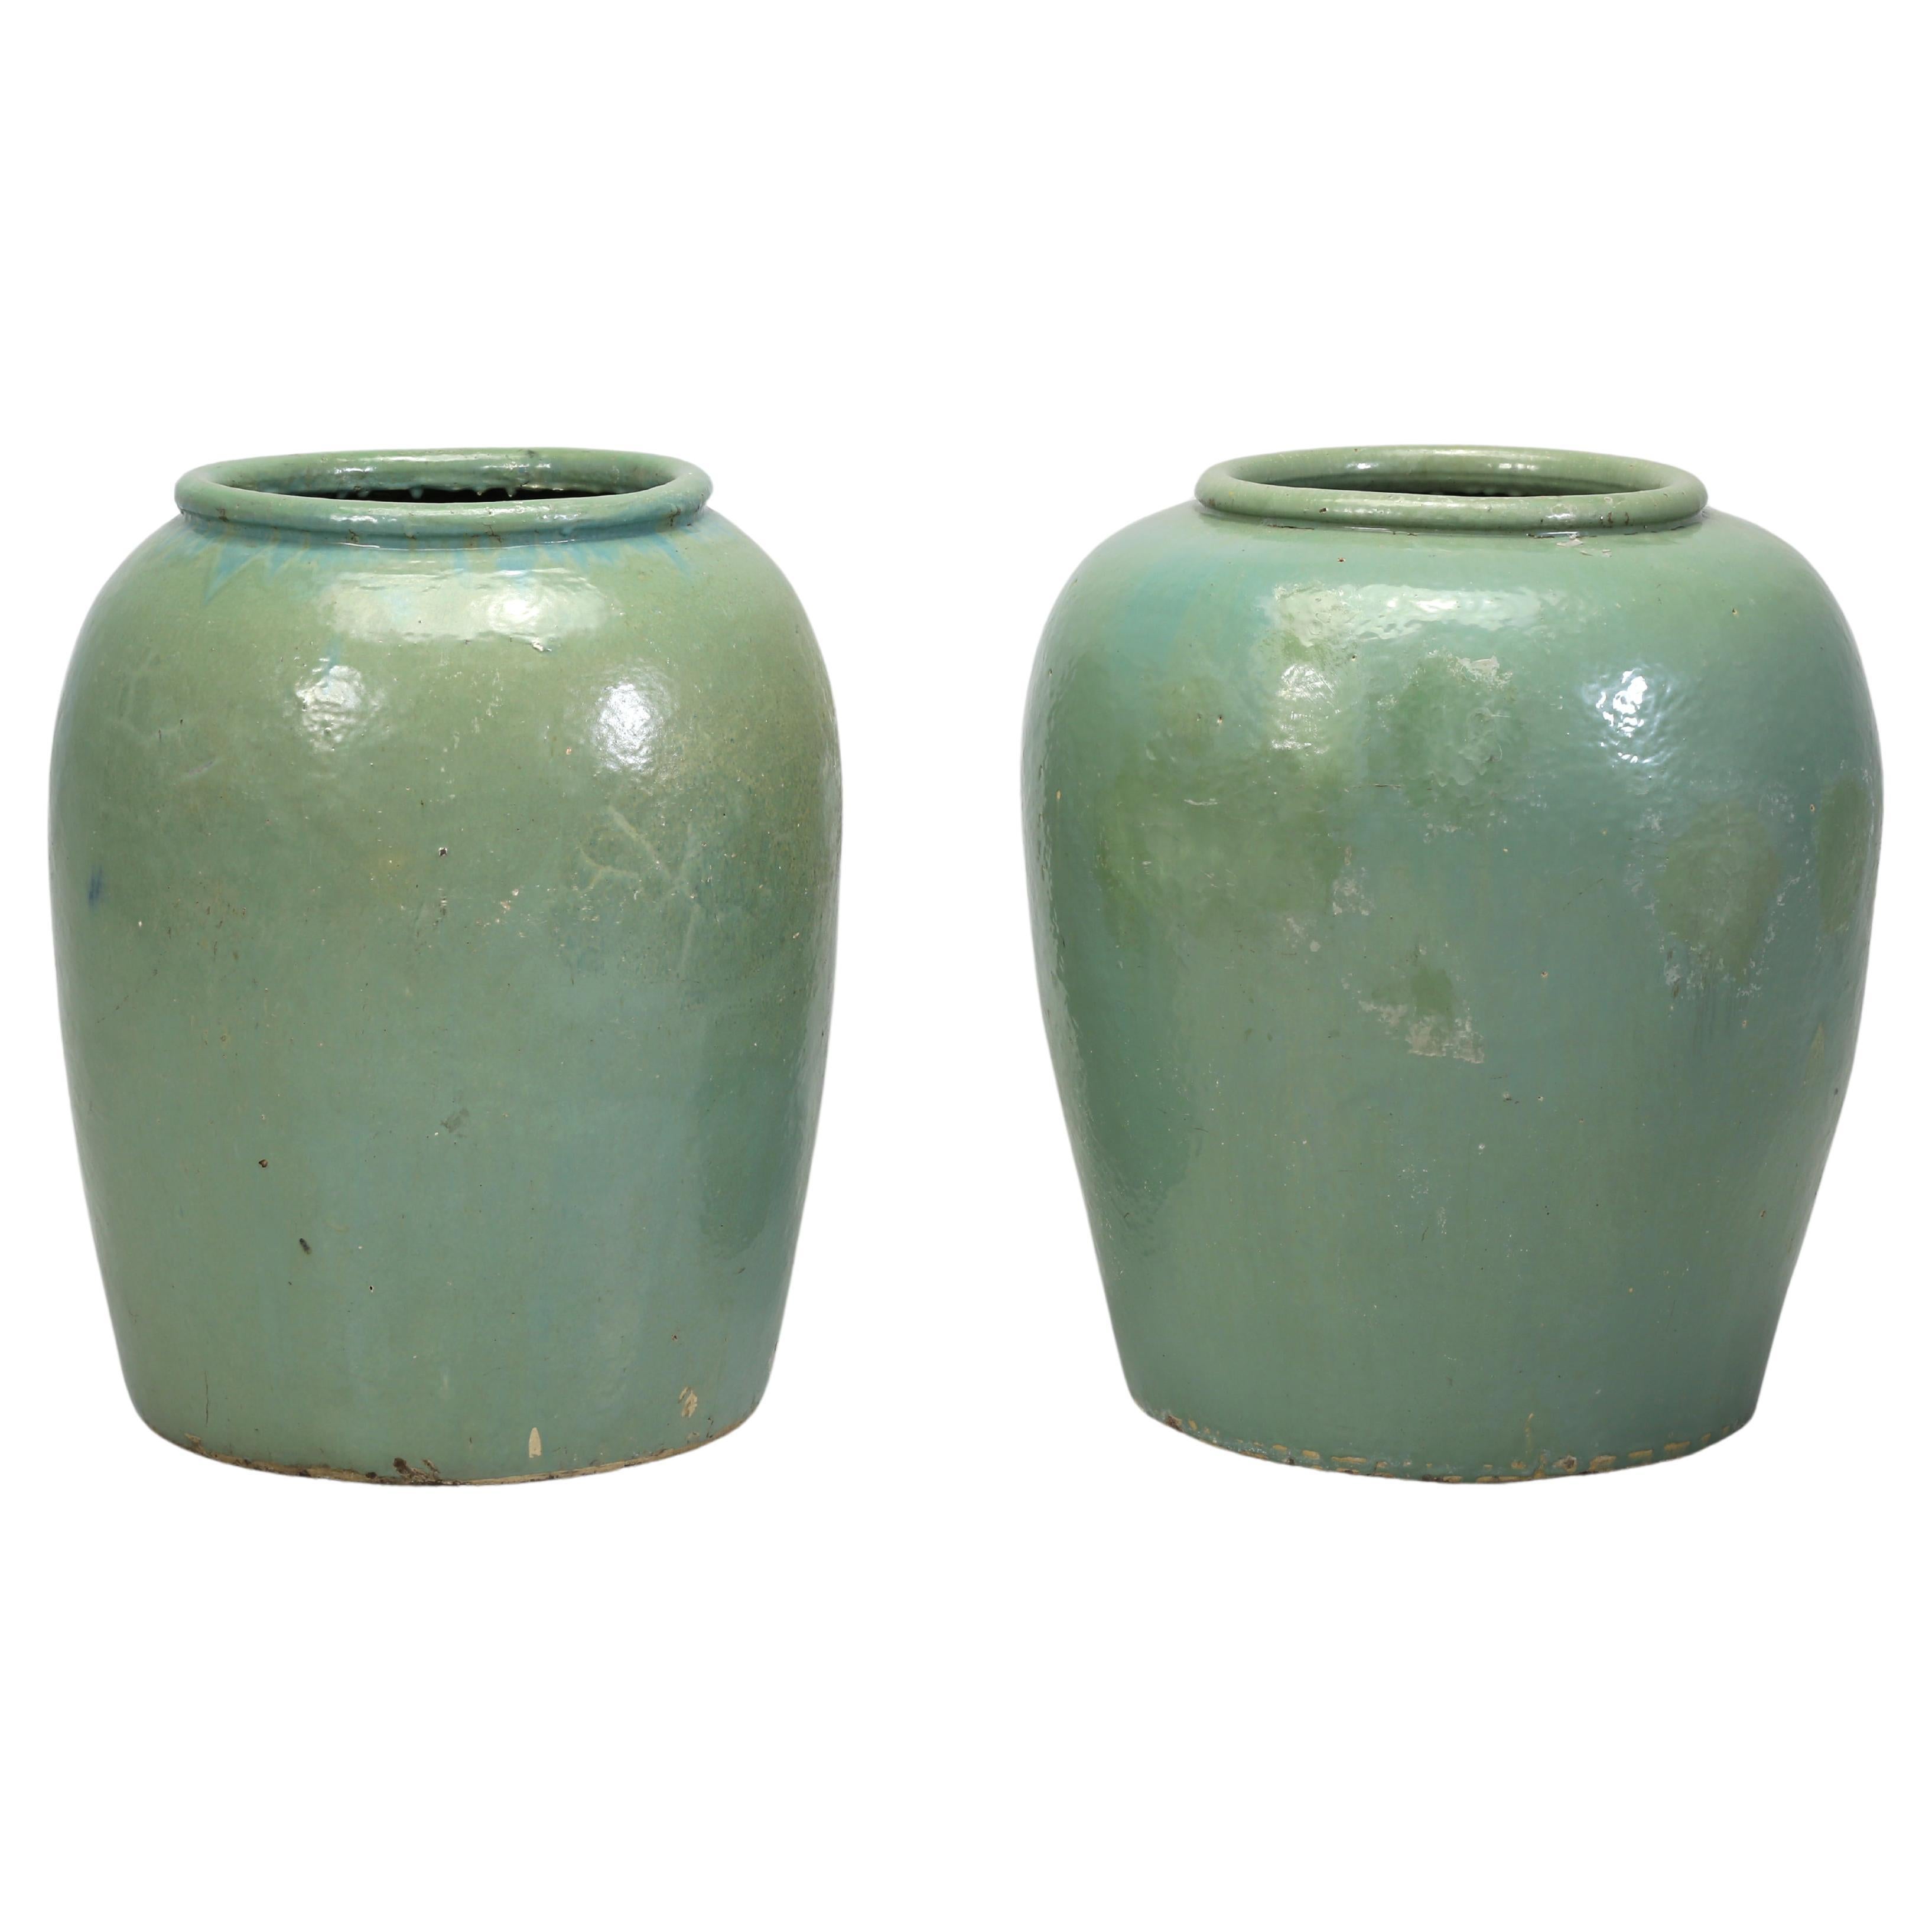 Glazed Green Vintage Garden Planters Imported from Ireland We'd call a Near Pair